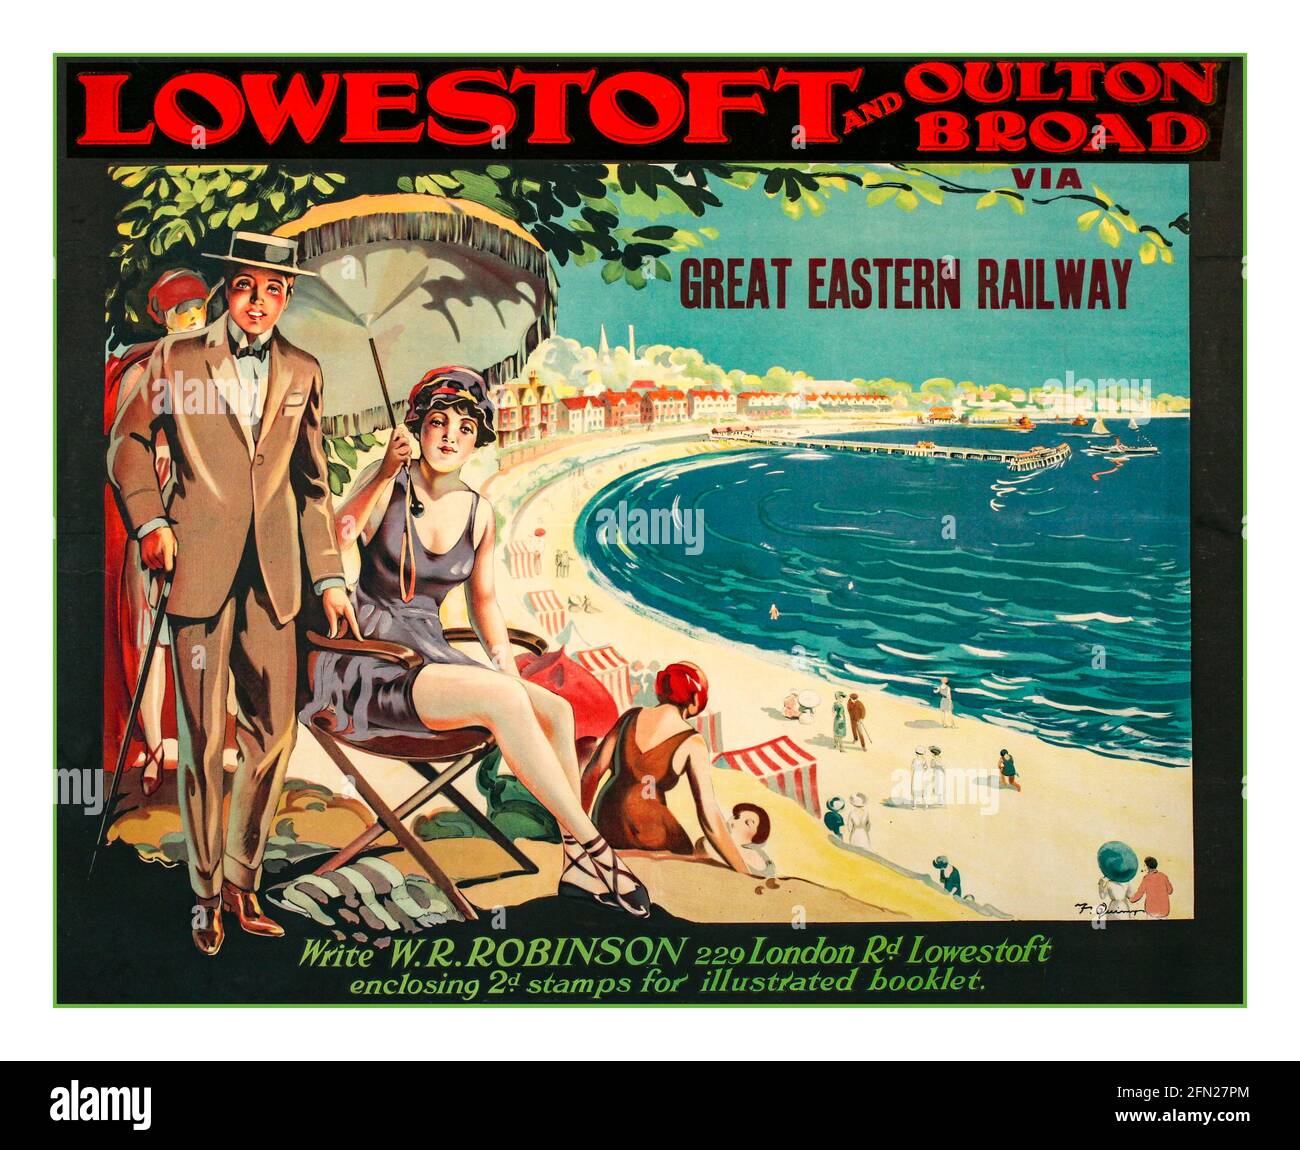 Vintage 1900’s Lowestoft & Oulton Broad Travel Railway Poster 1915 Artist: F Quinny  Lowestoft and Oulton Broad via Great Eastern Railway. Write W R Robinson, 229 London Road, Lowestoft enclosing 2d stamps for illustrated leaflet. UK Vintage Travel Poster Stock Photo